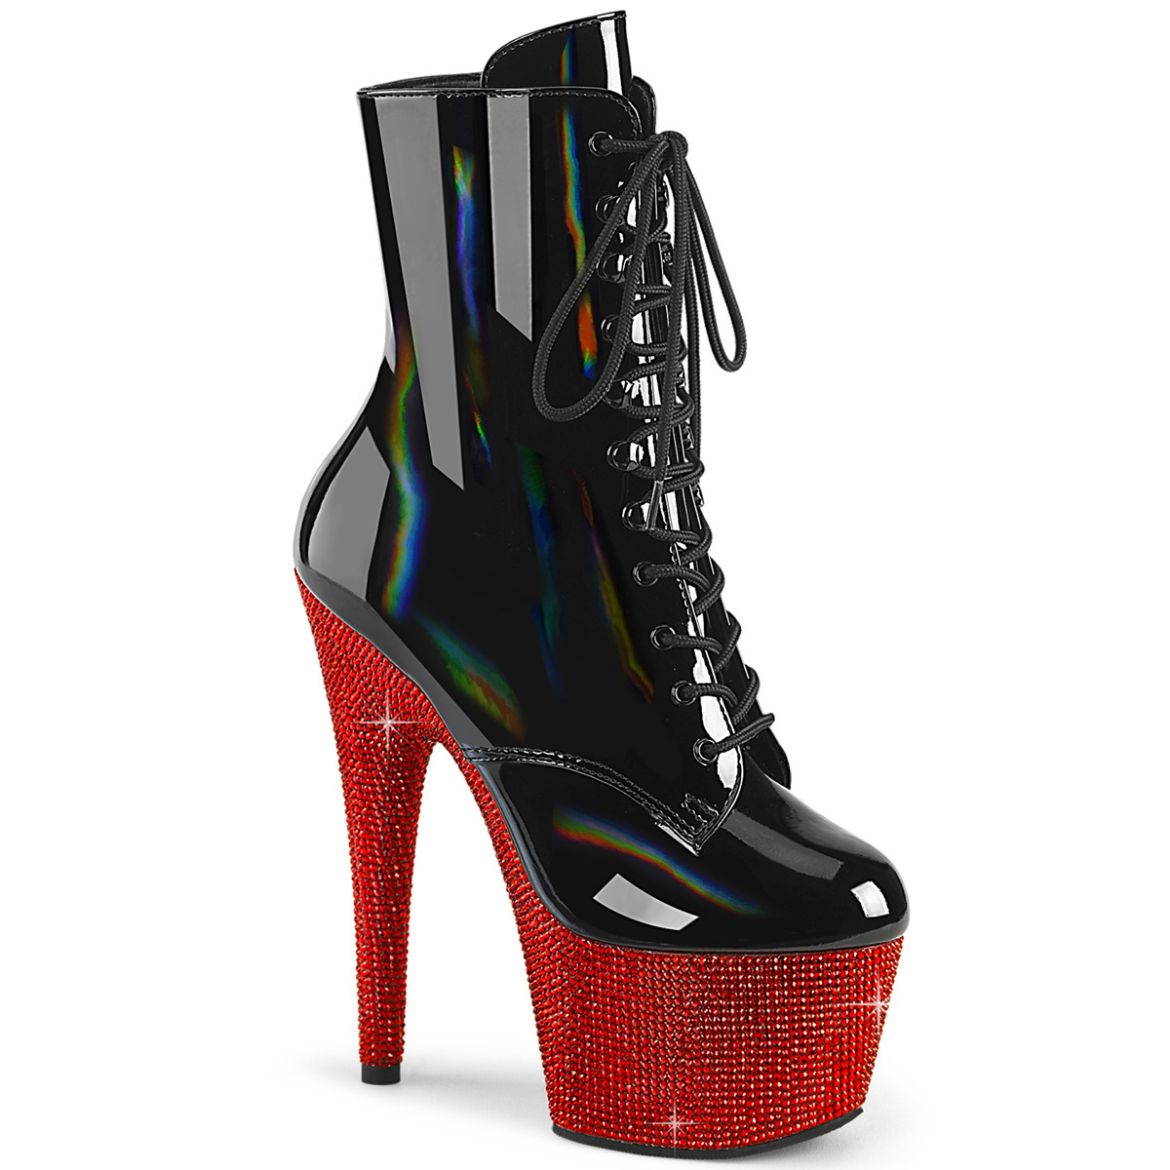 Product image of Pleaser BEJEWELED-1020-7 Blk Holo Pat/Red RS 7 Inch Heel 2 3/4 Inch PF Front Lace-Up Ankle Boot w/RS Side Zip